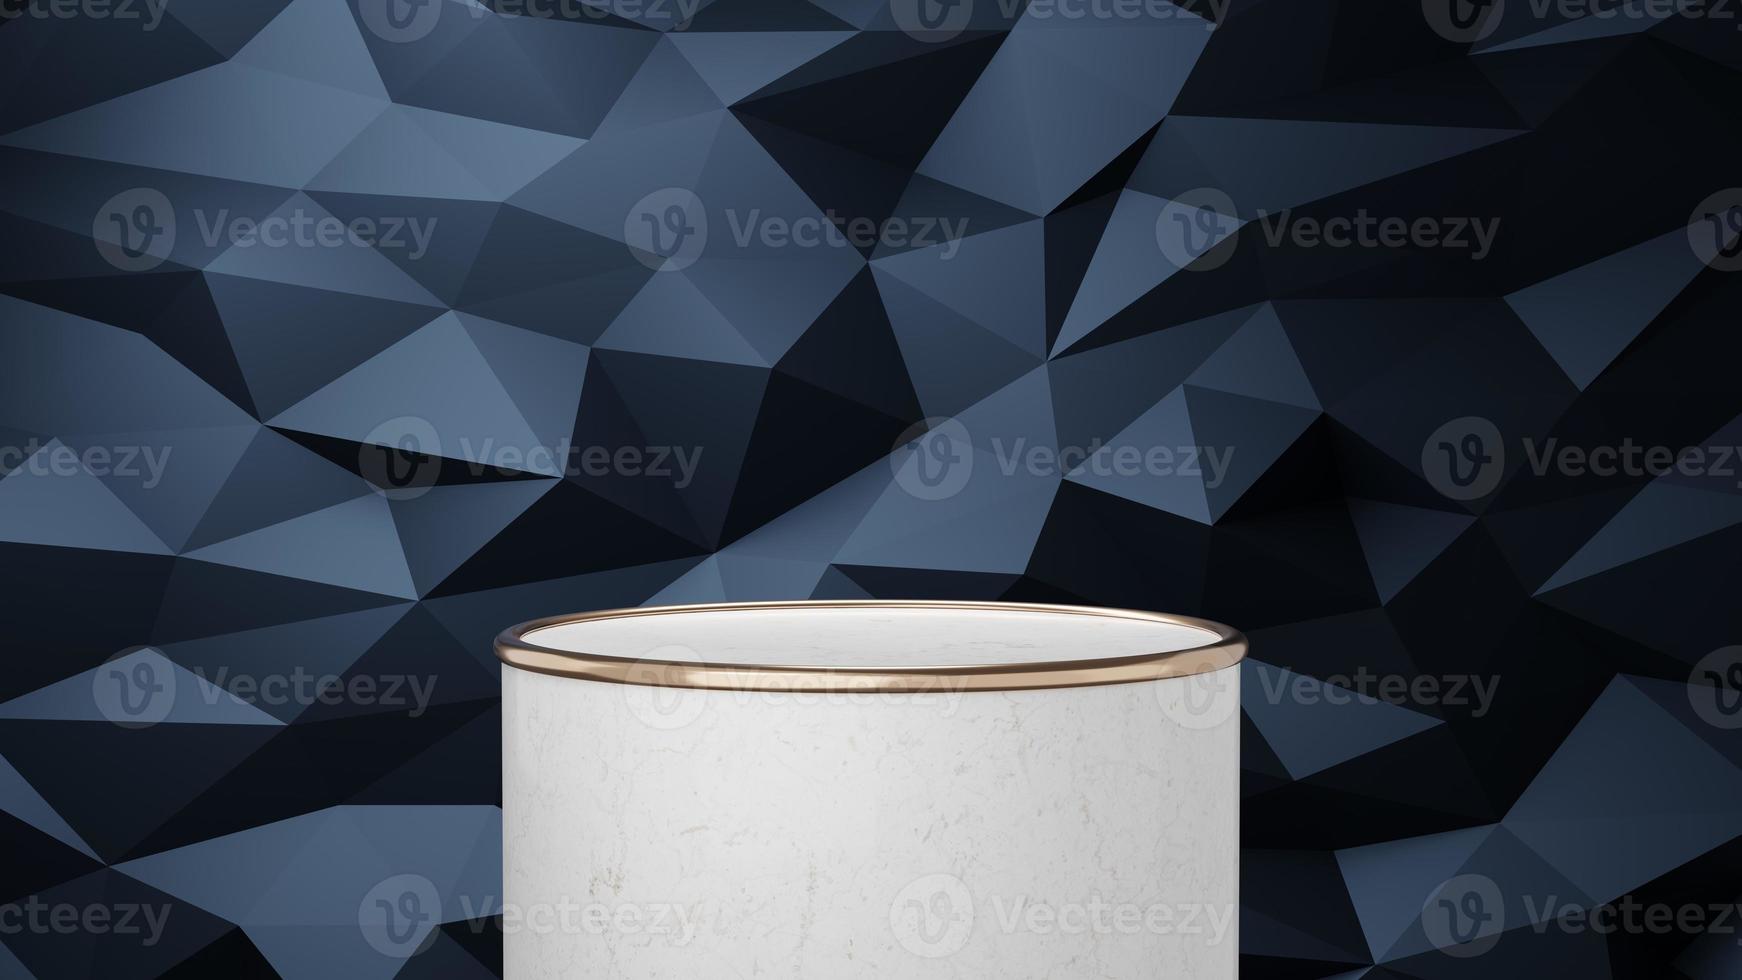 white marble cylinder podium with gold border float on dark blue triangle texture background. Abstract minimal studio geometric object. Pedestal mockup space for display of product design. 3d render. photo